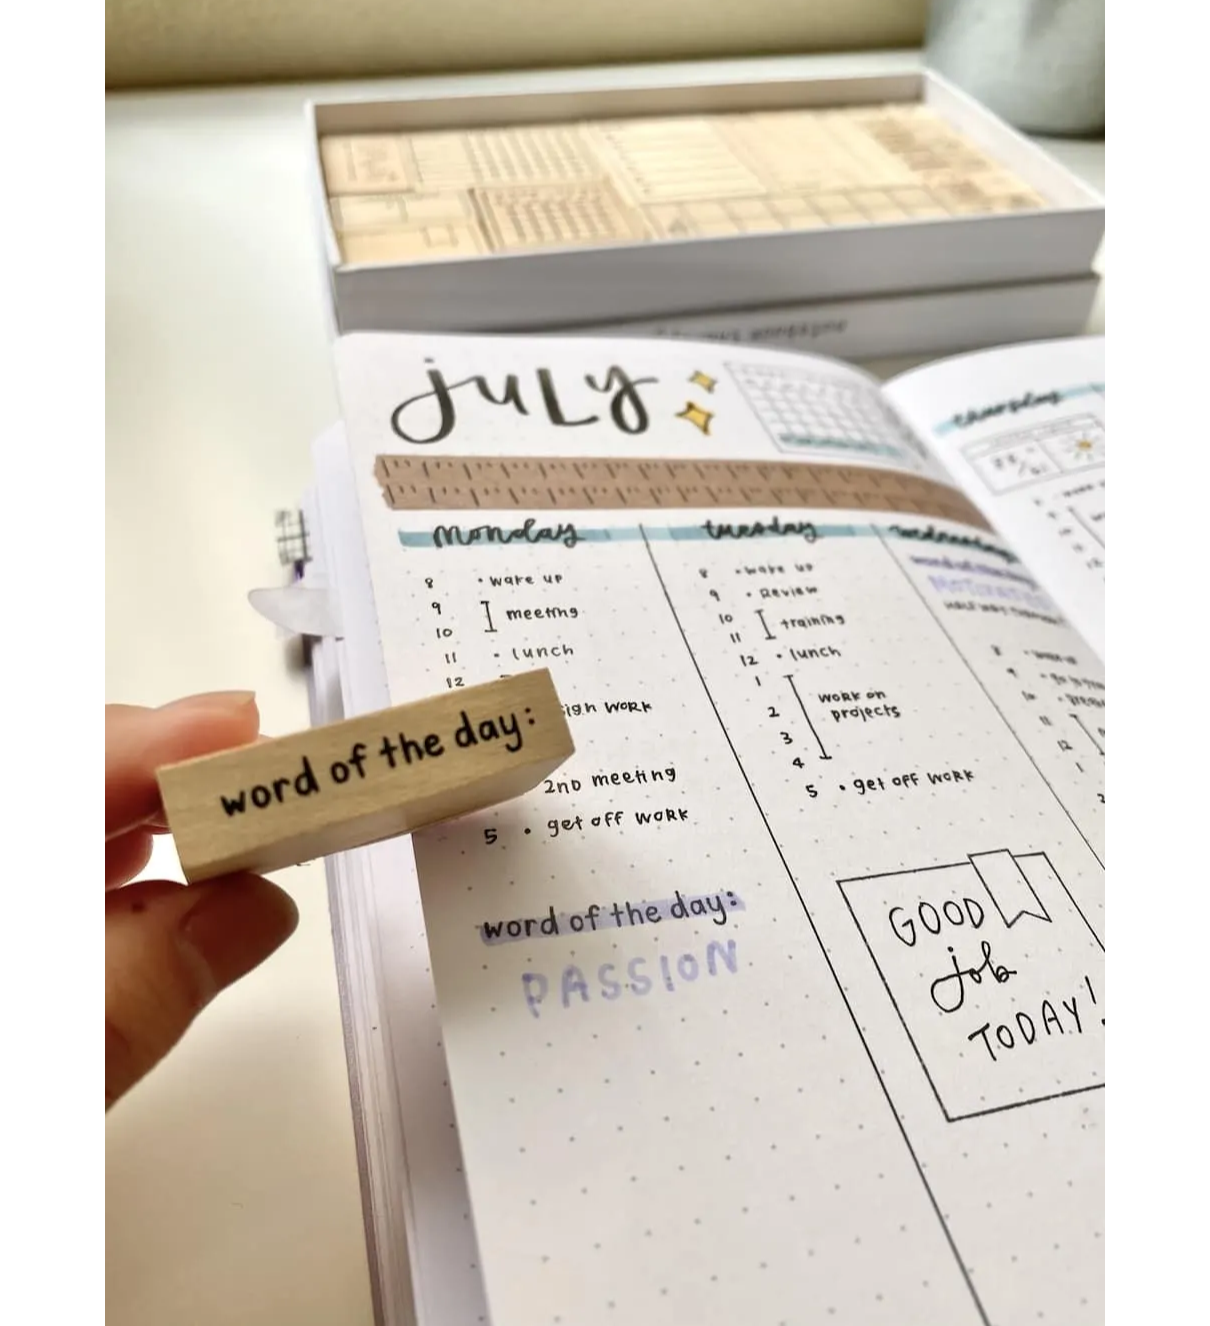 How to use Stamps in your Bullet Journal